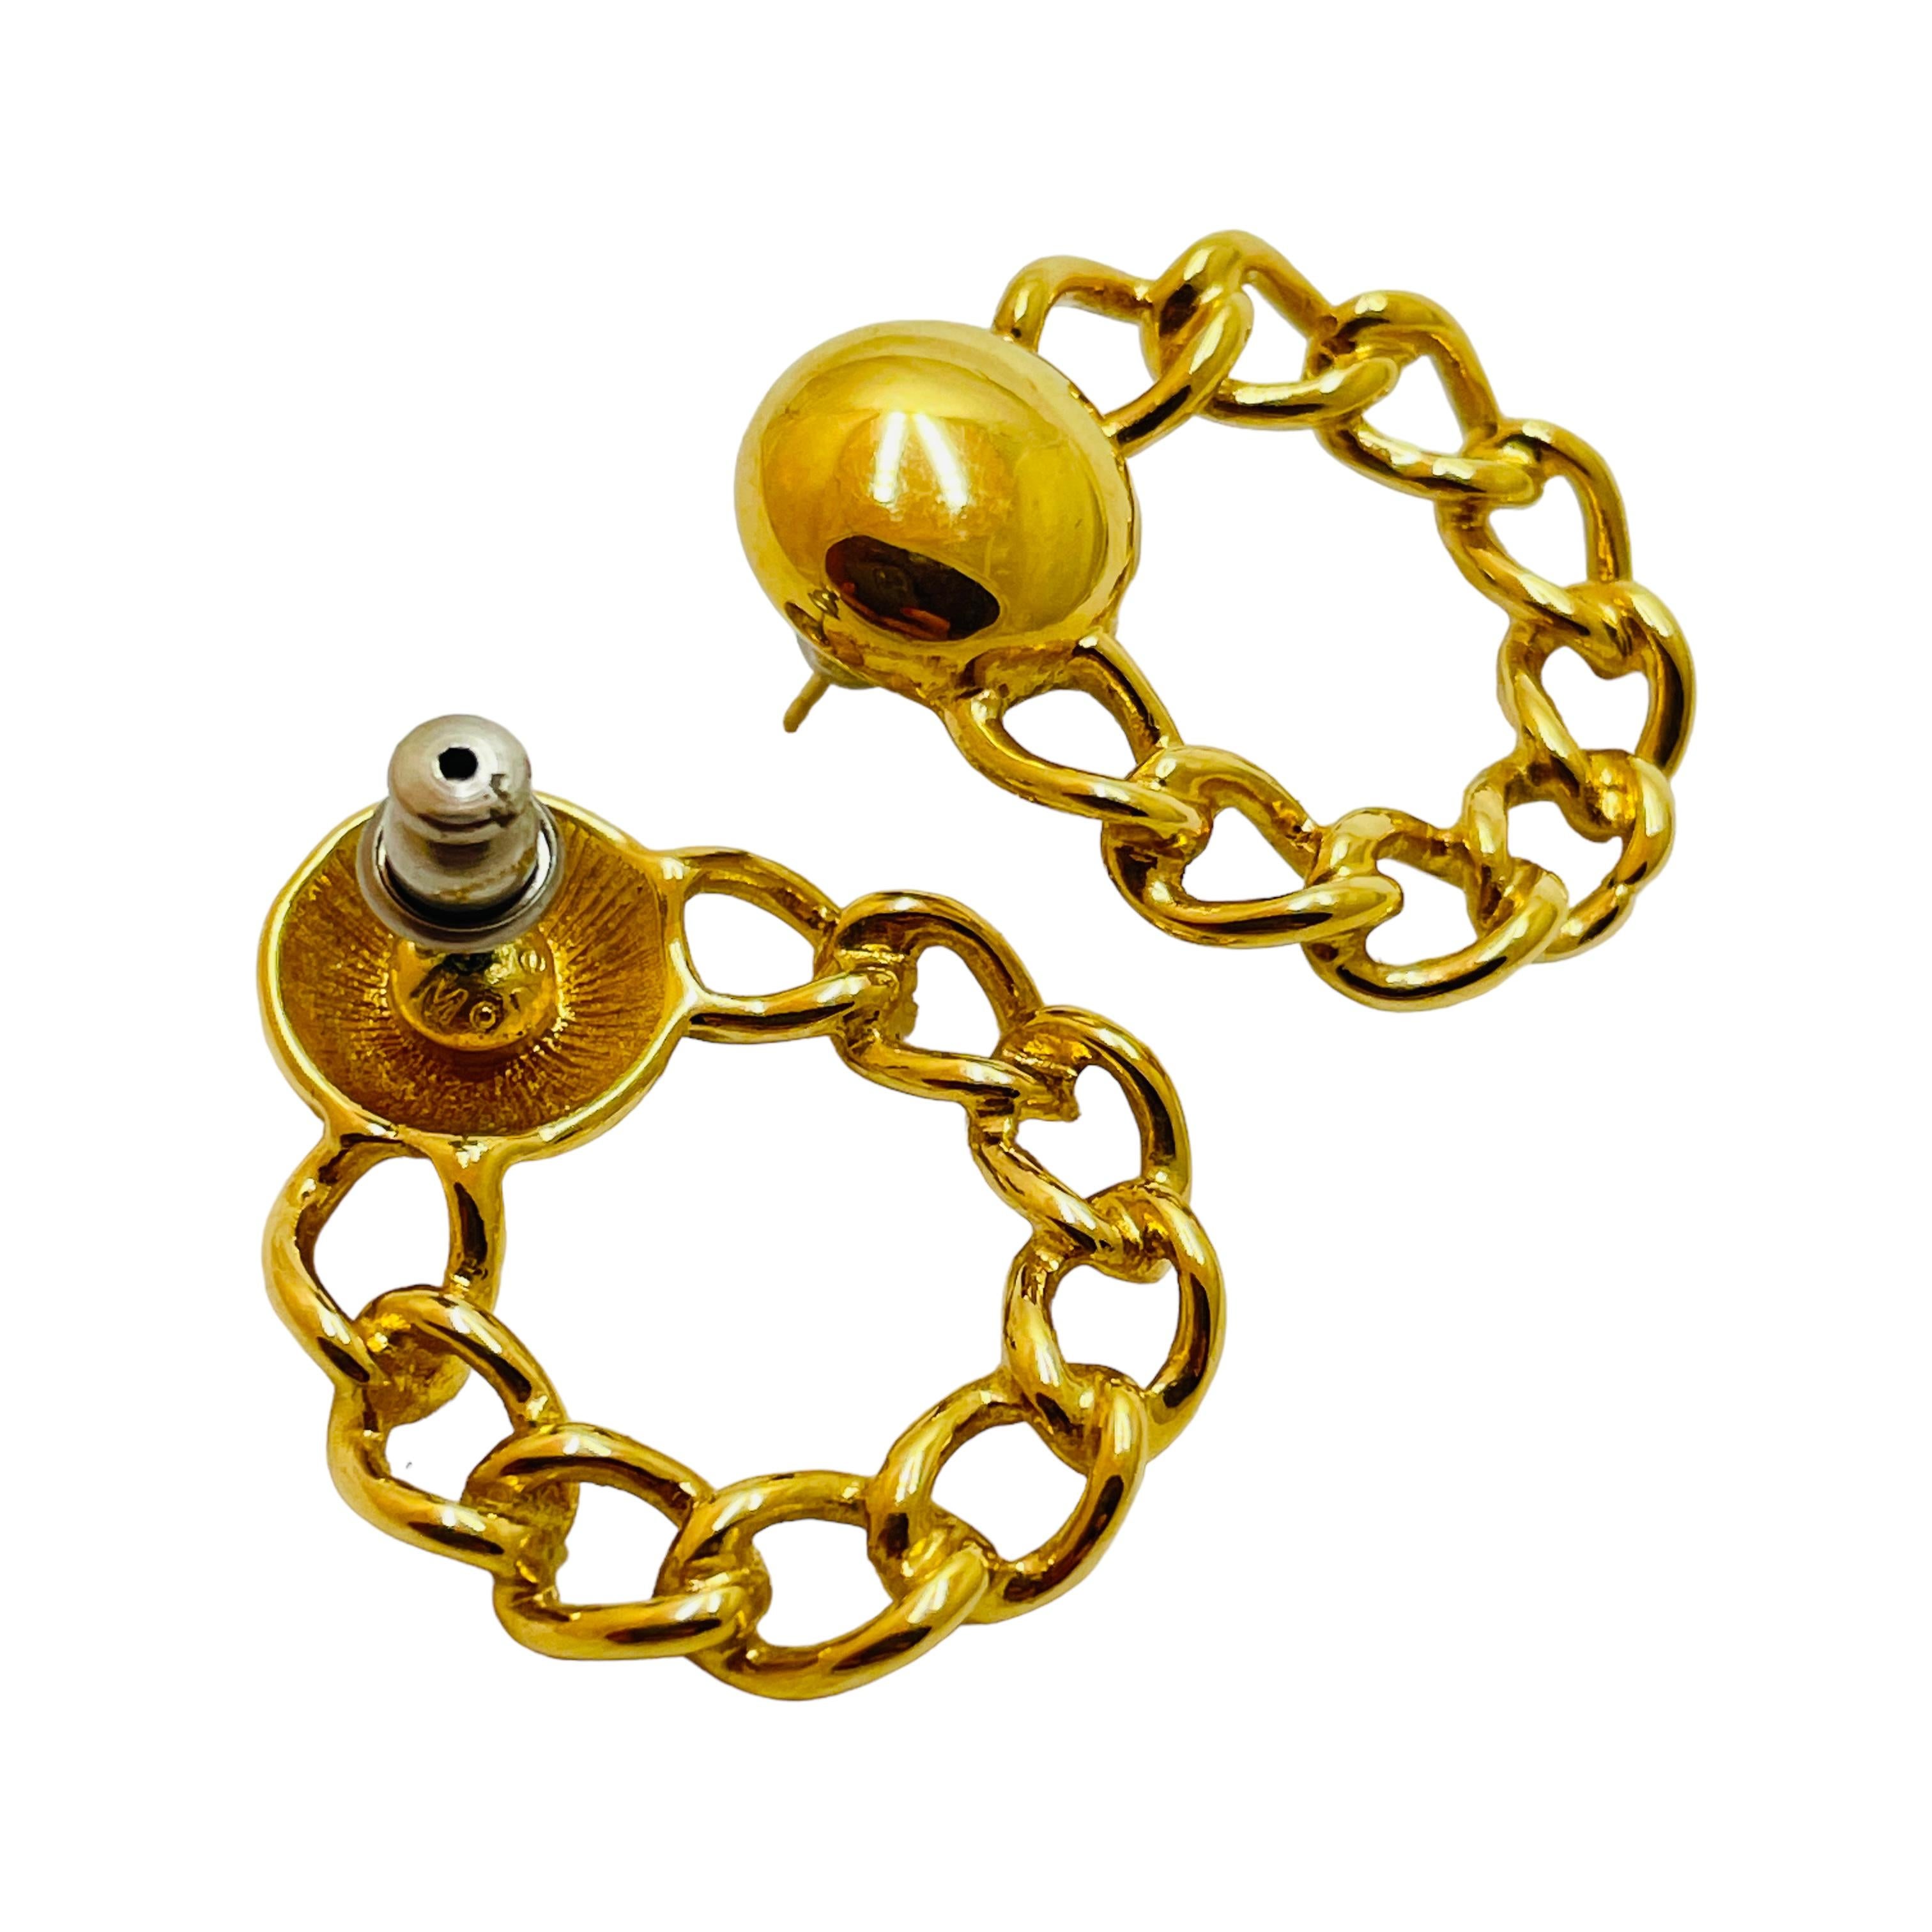 Vintage MONET gold chain pierced designer earrings In Excellent Condition For Sale In Palos Hills, IL